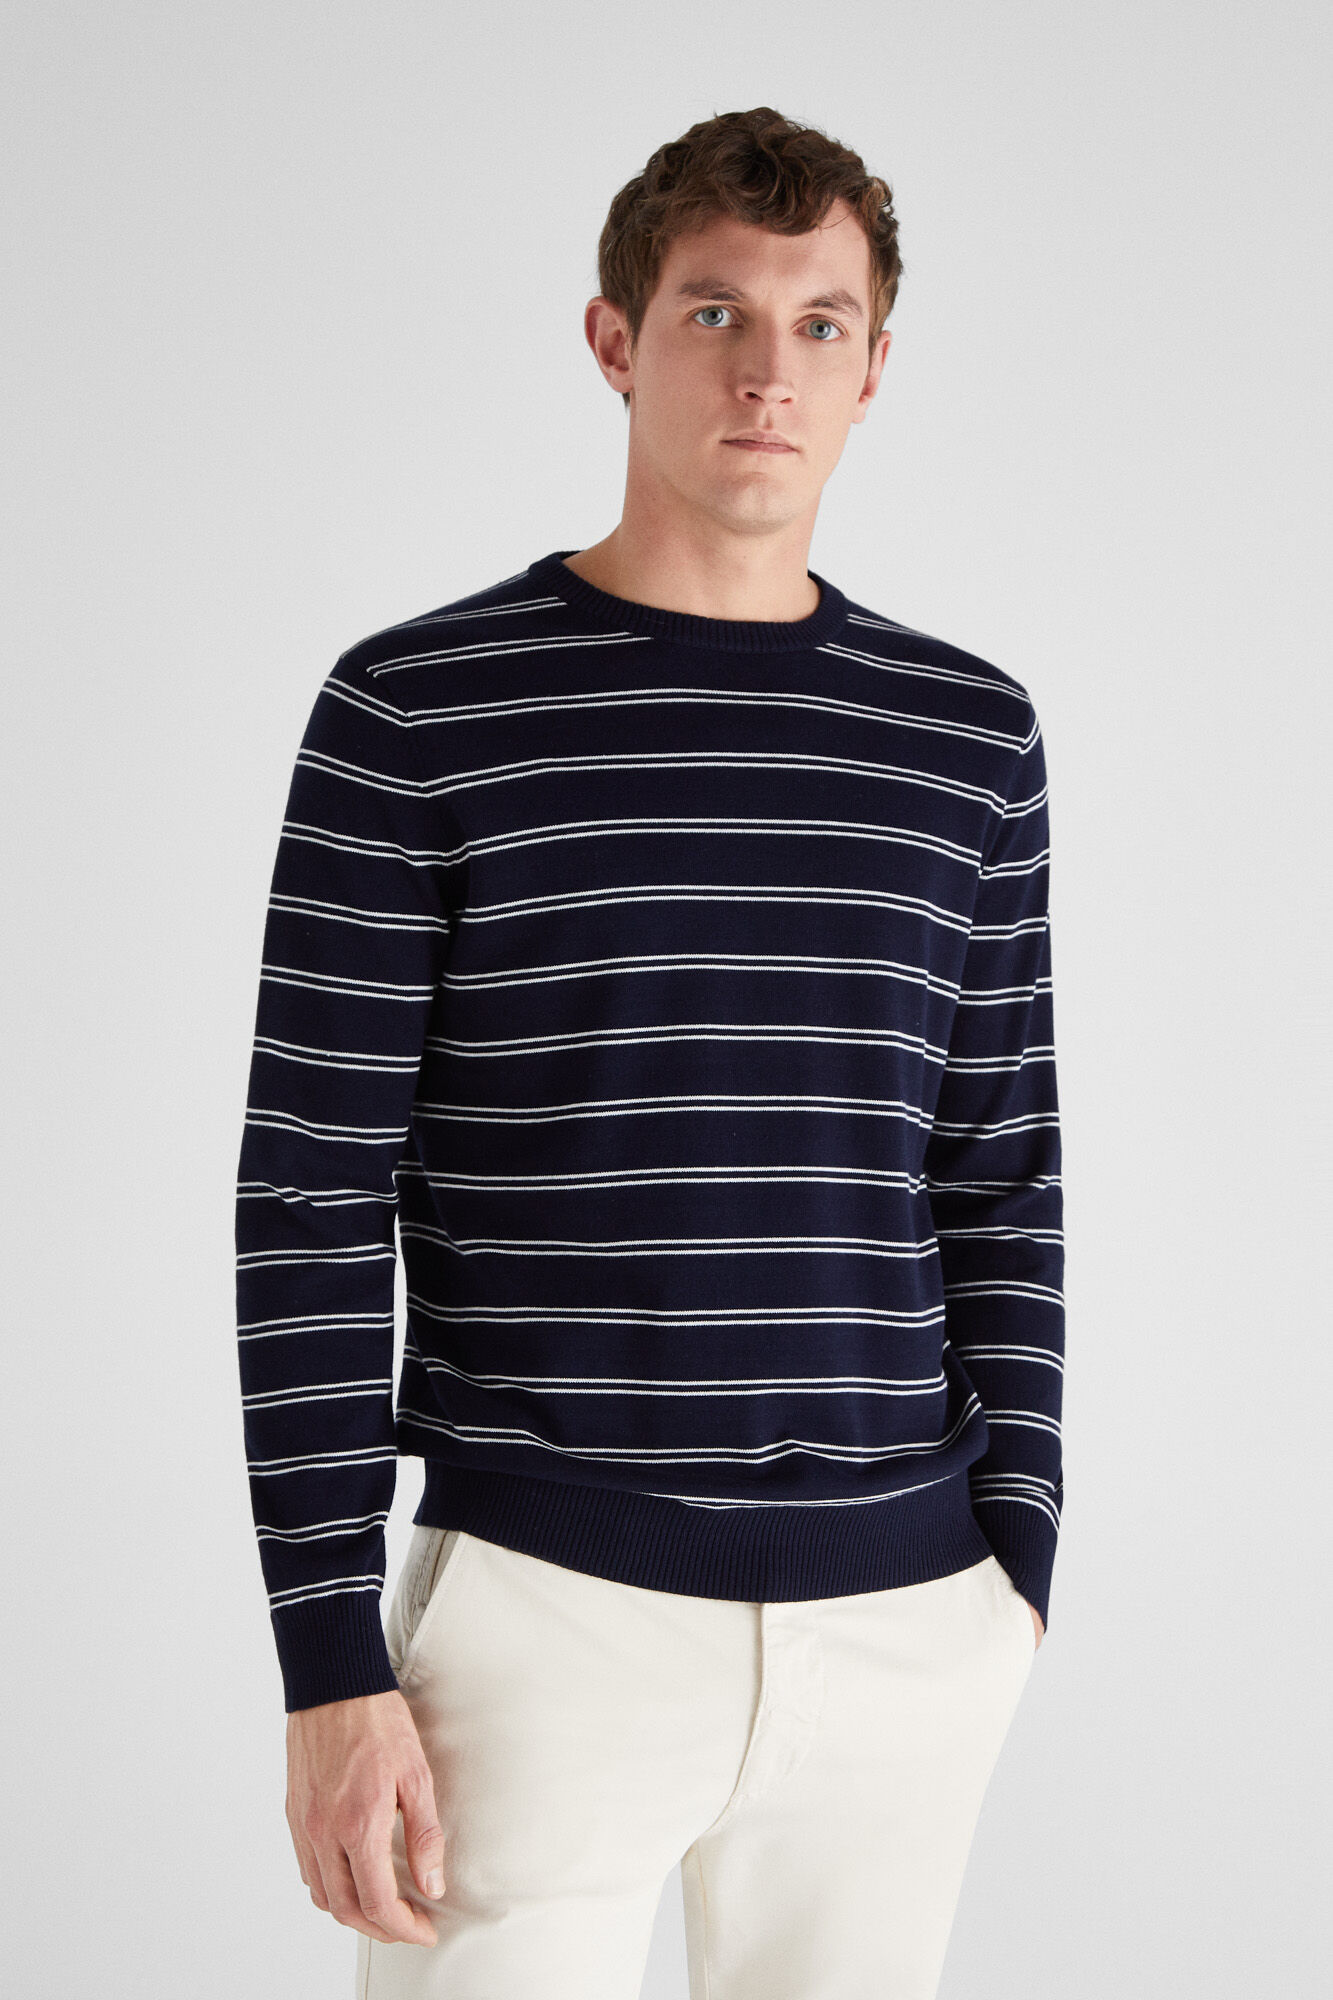 shirt with crew neck jumper